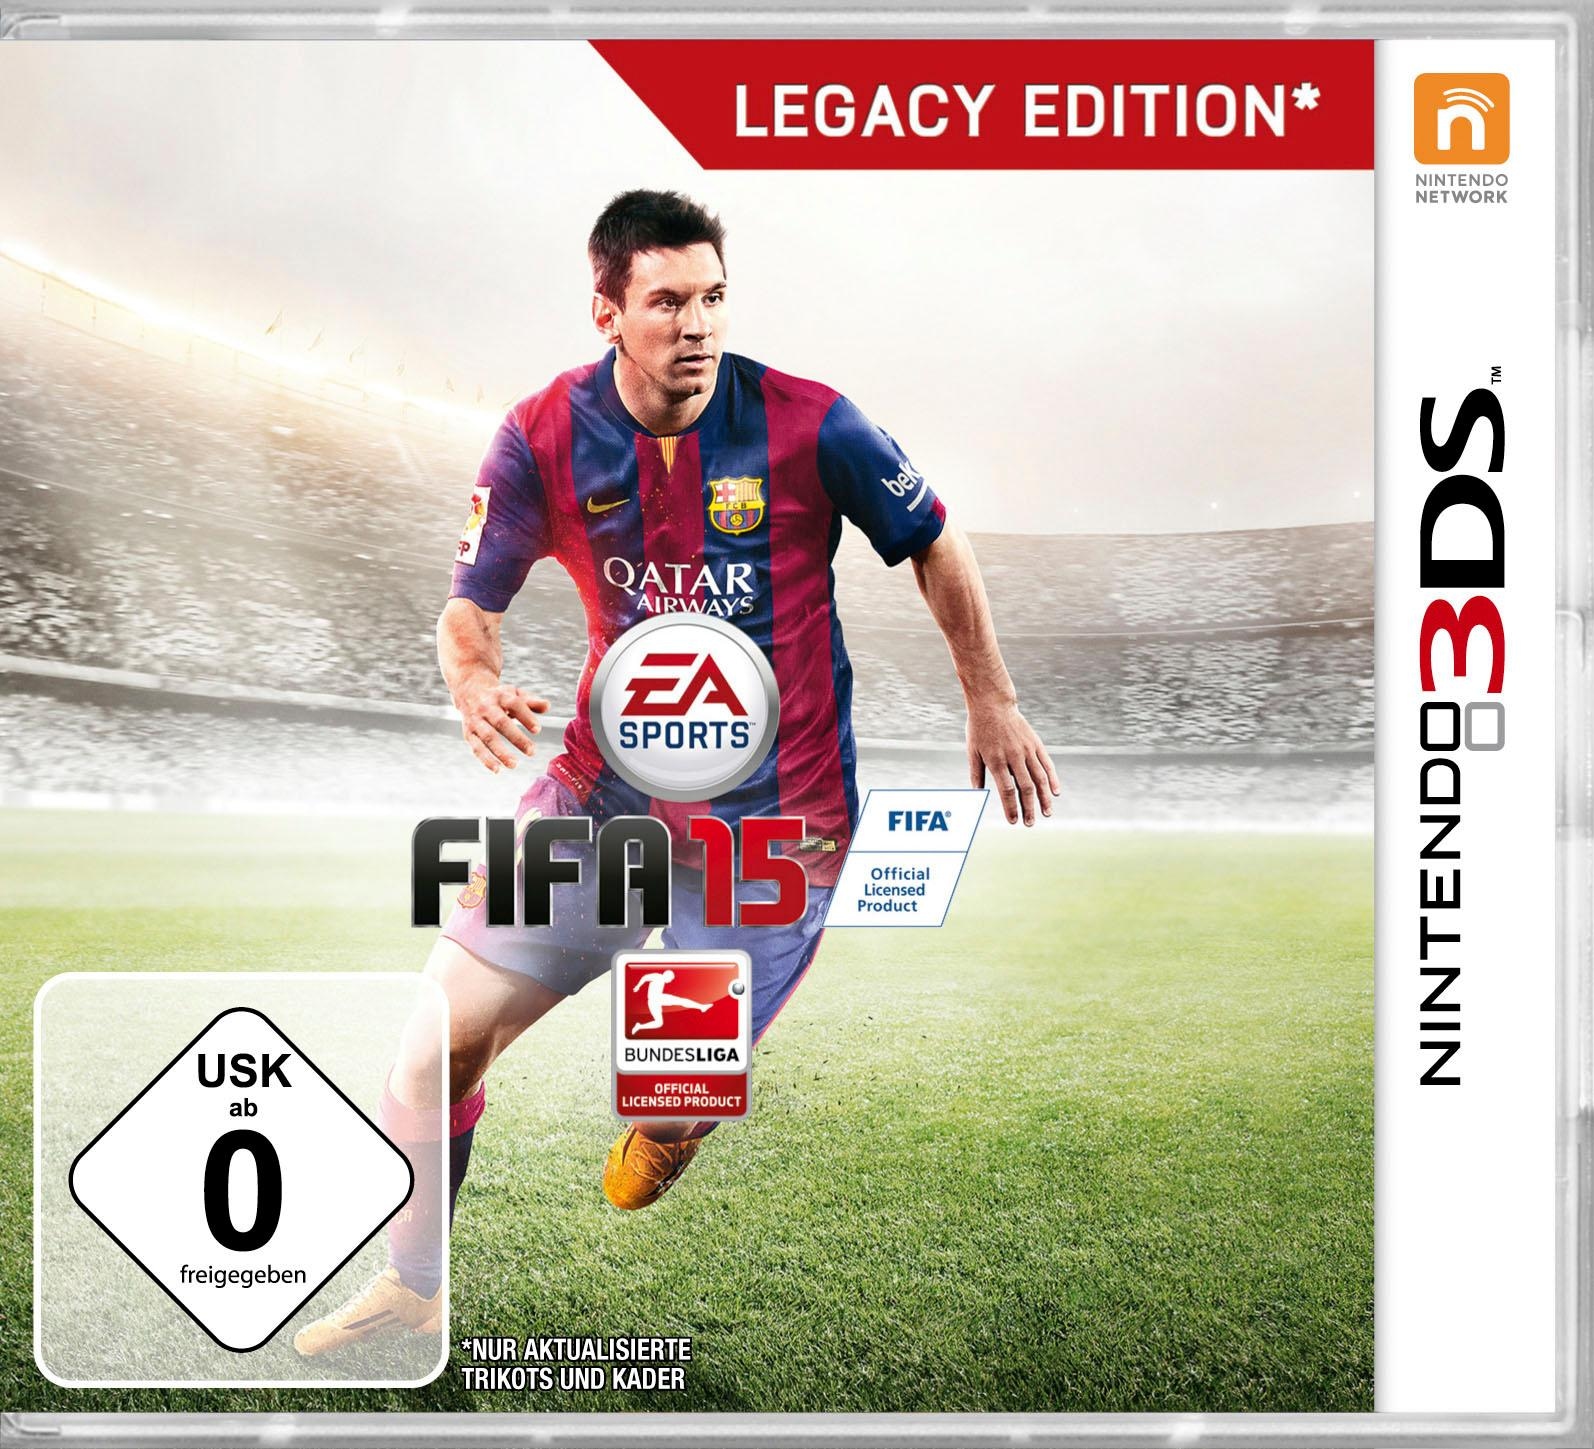 Electronic Arts Spielesoftware »Fifa 15 Legacy Edition«, Nintendo 3DS, Software Pyramide